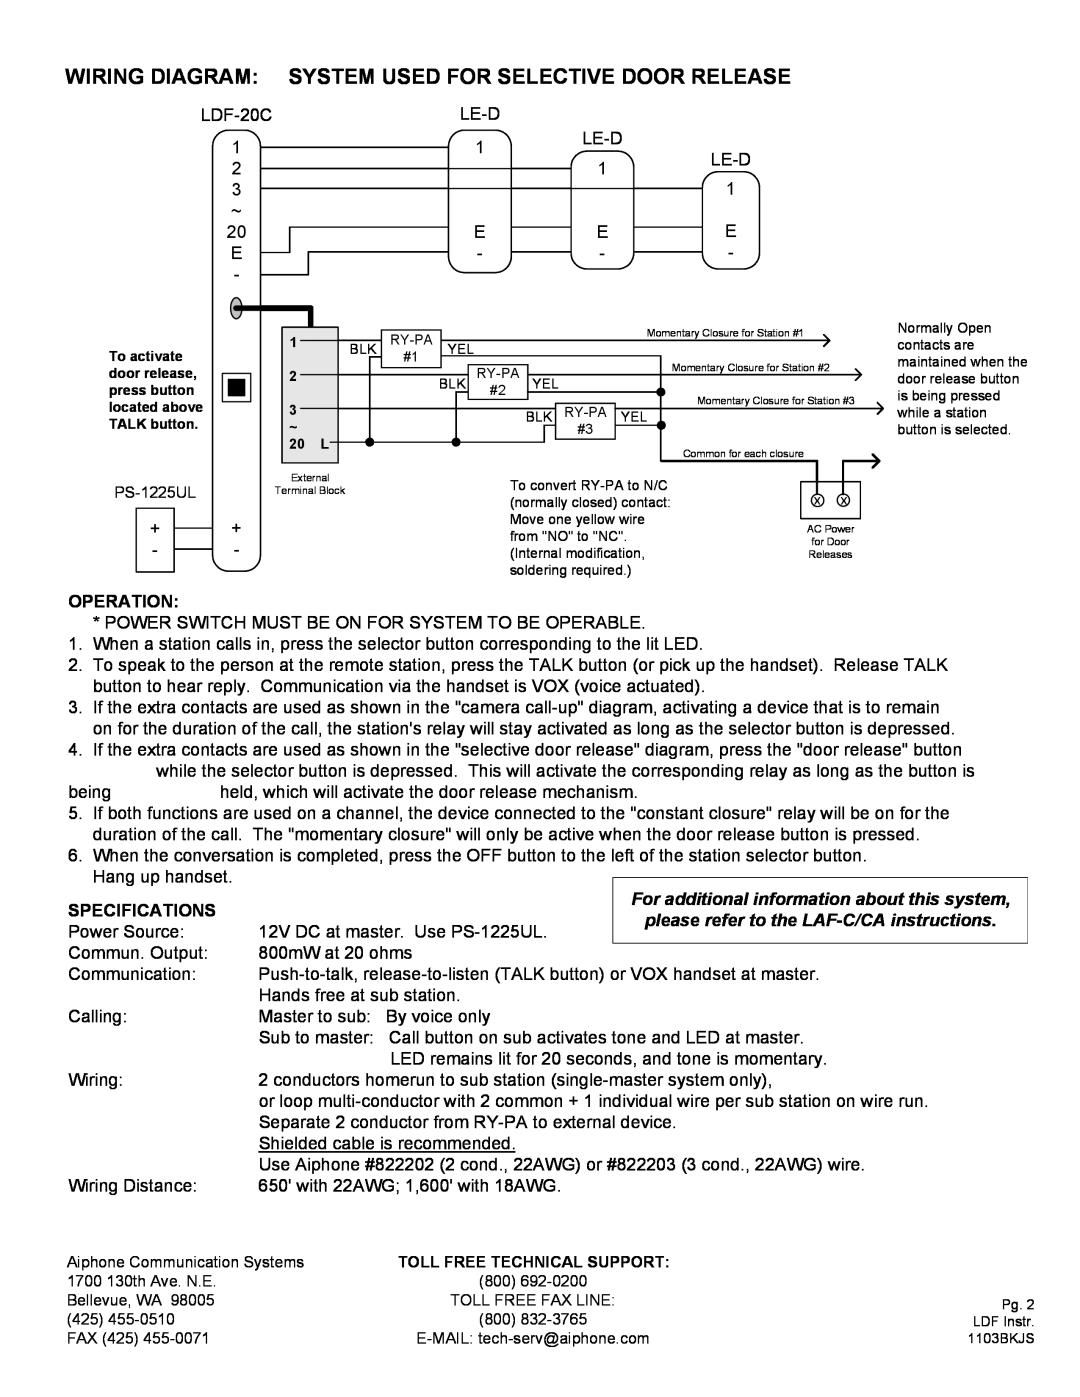 Aiphone LDF-20C manual Wiring Diagram System Used For Selective Door Release, Operation, Specifications 